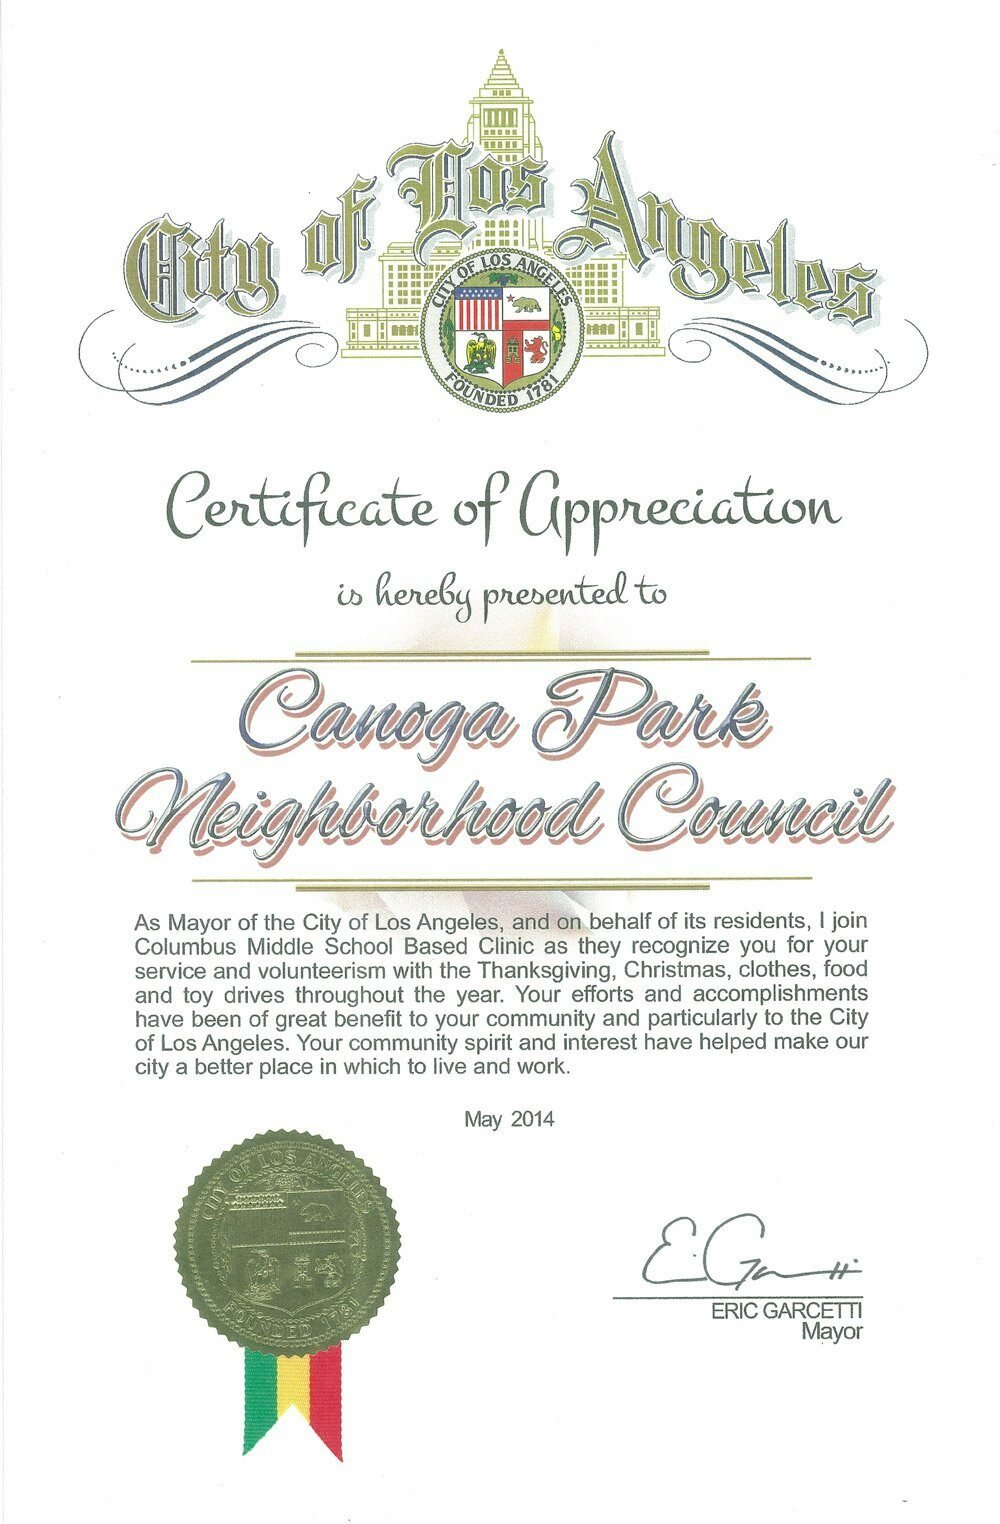 Certificates of Recognition for the Canoga Park Neighborhood Council